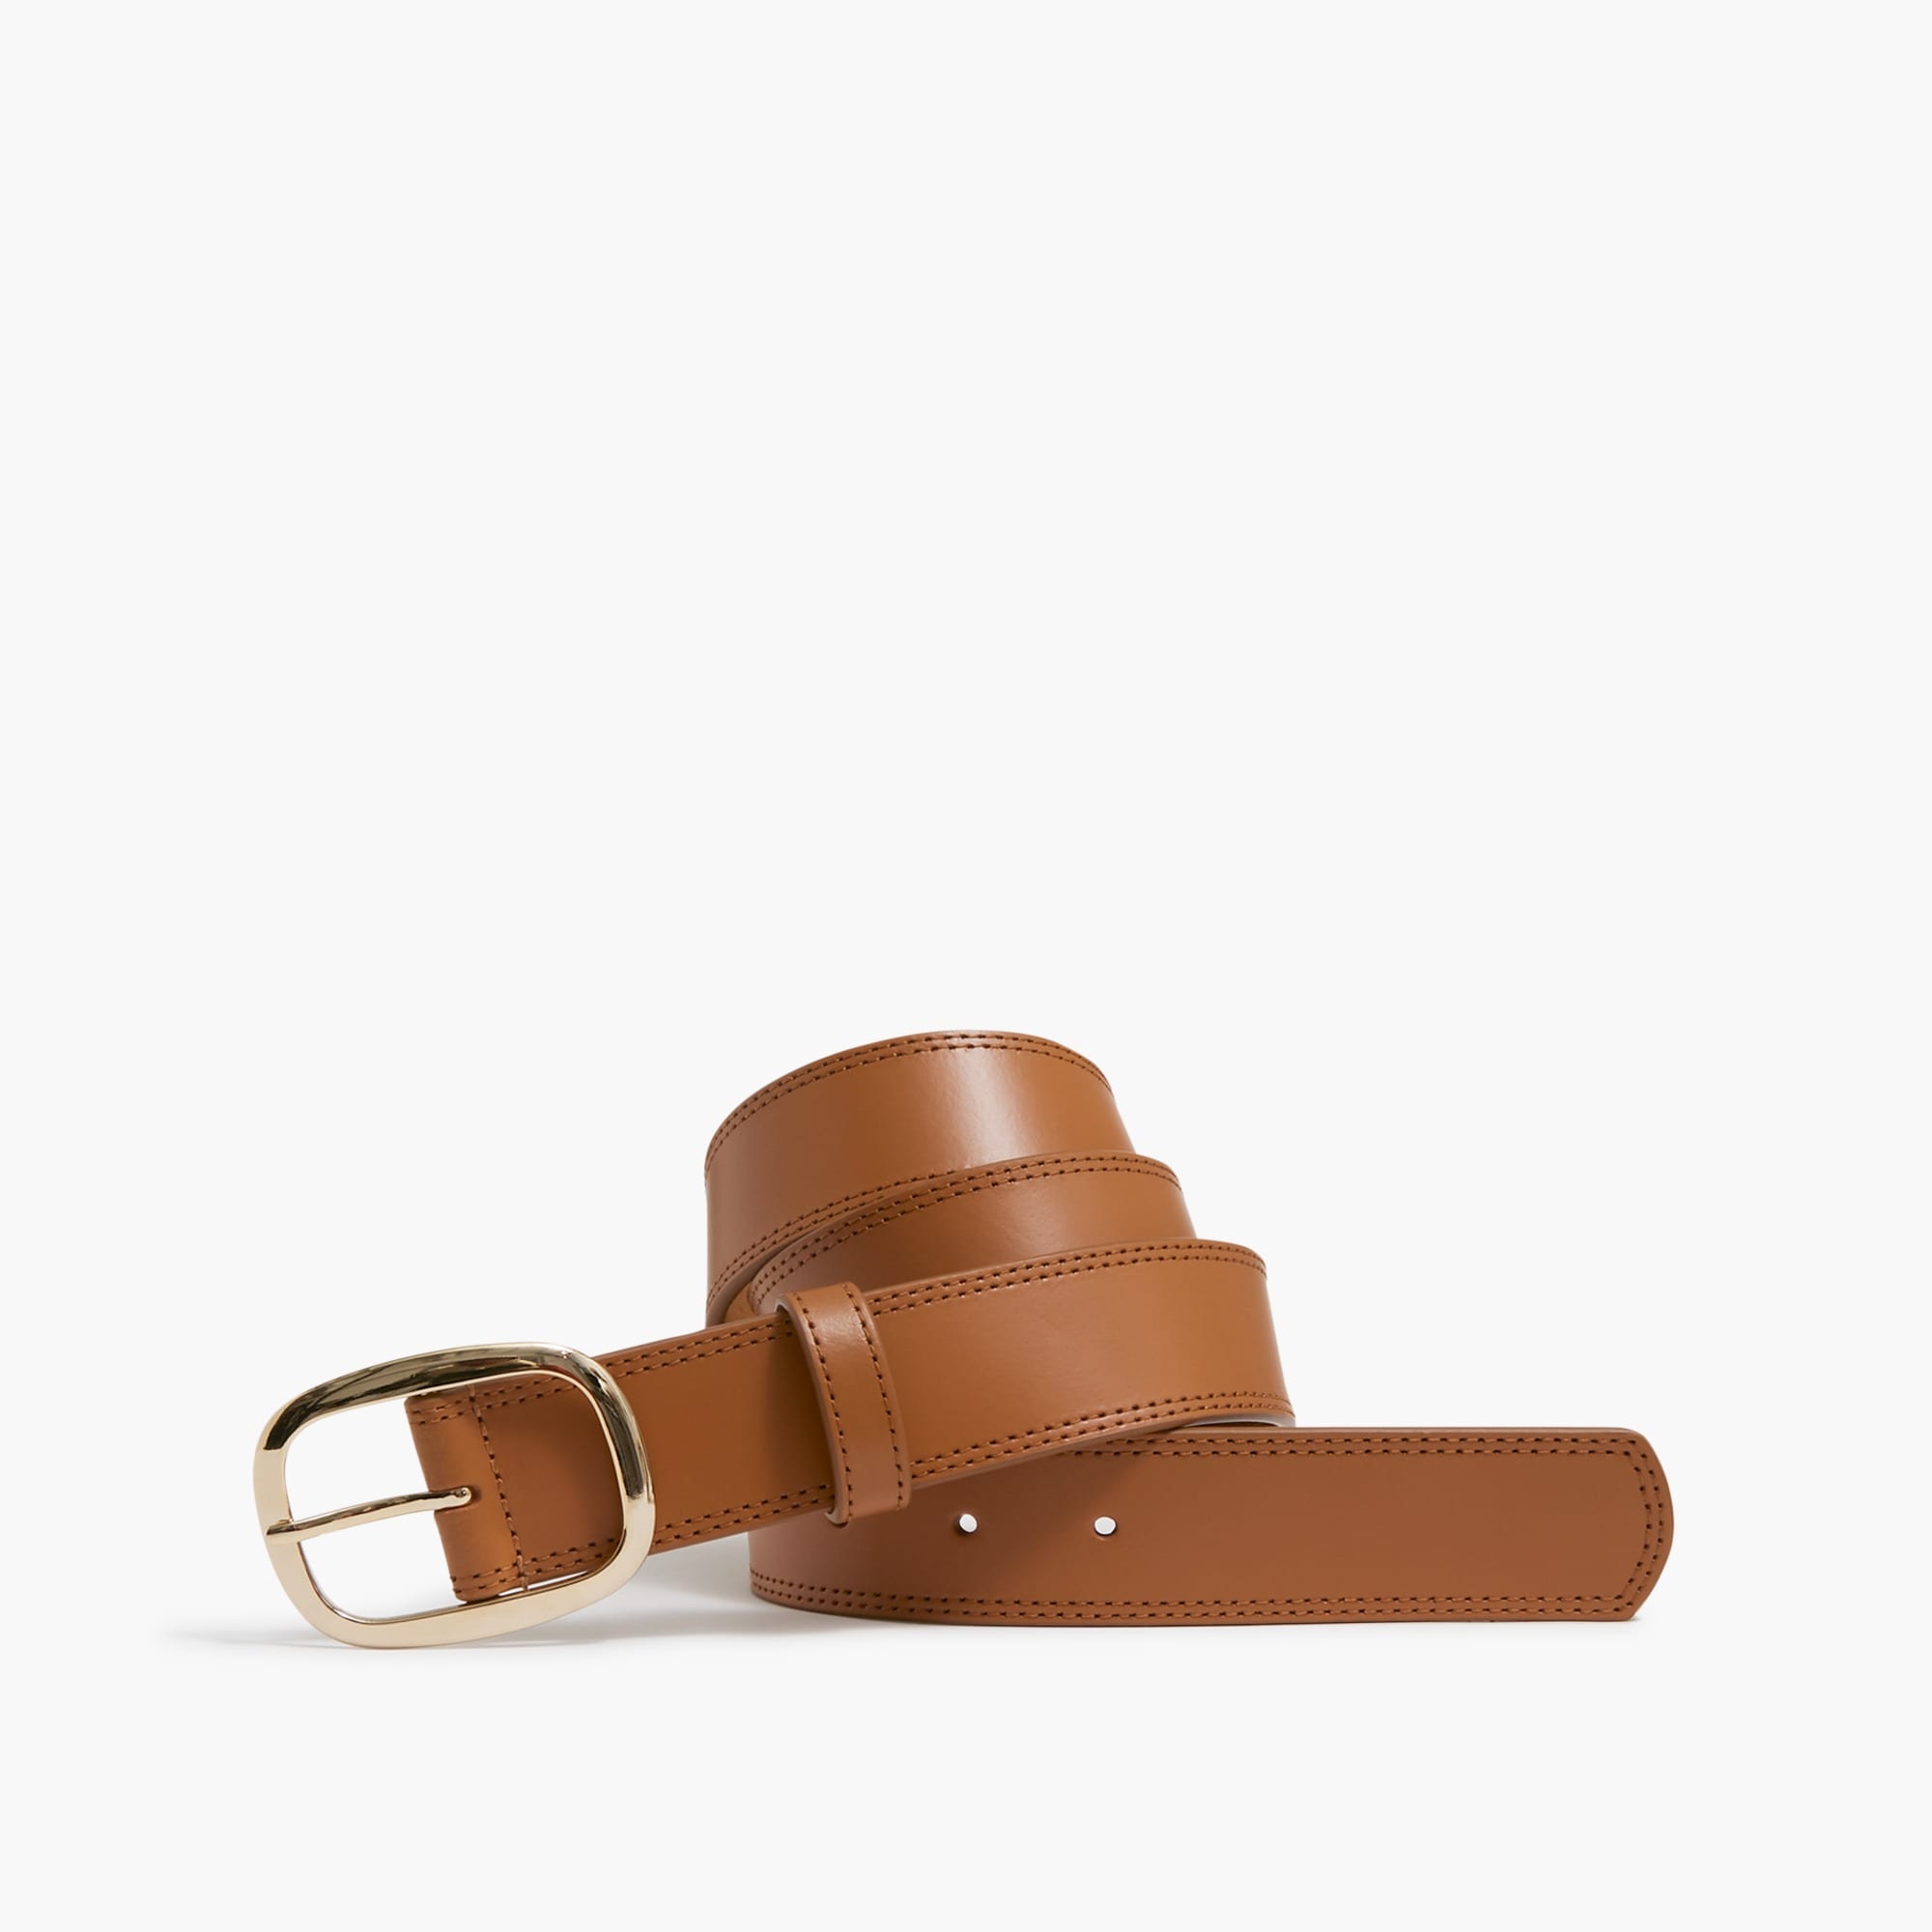  Large square buckle leather belt